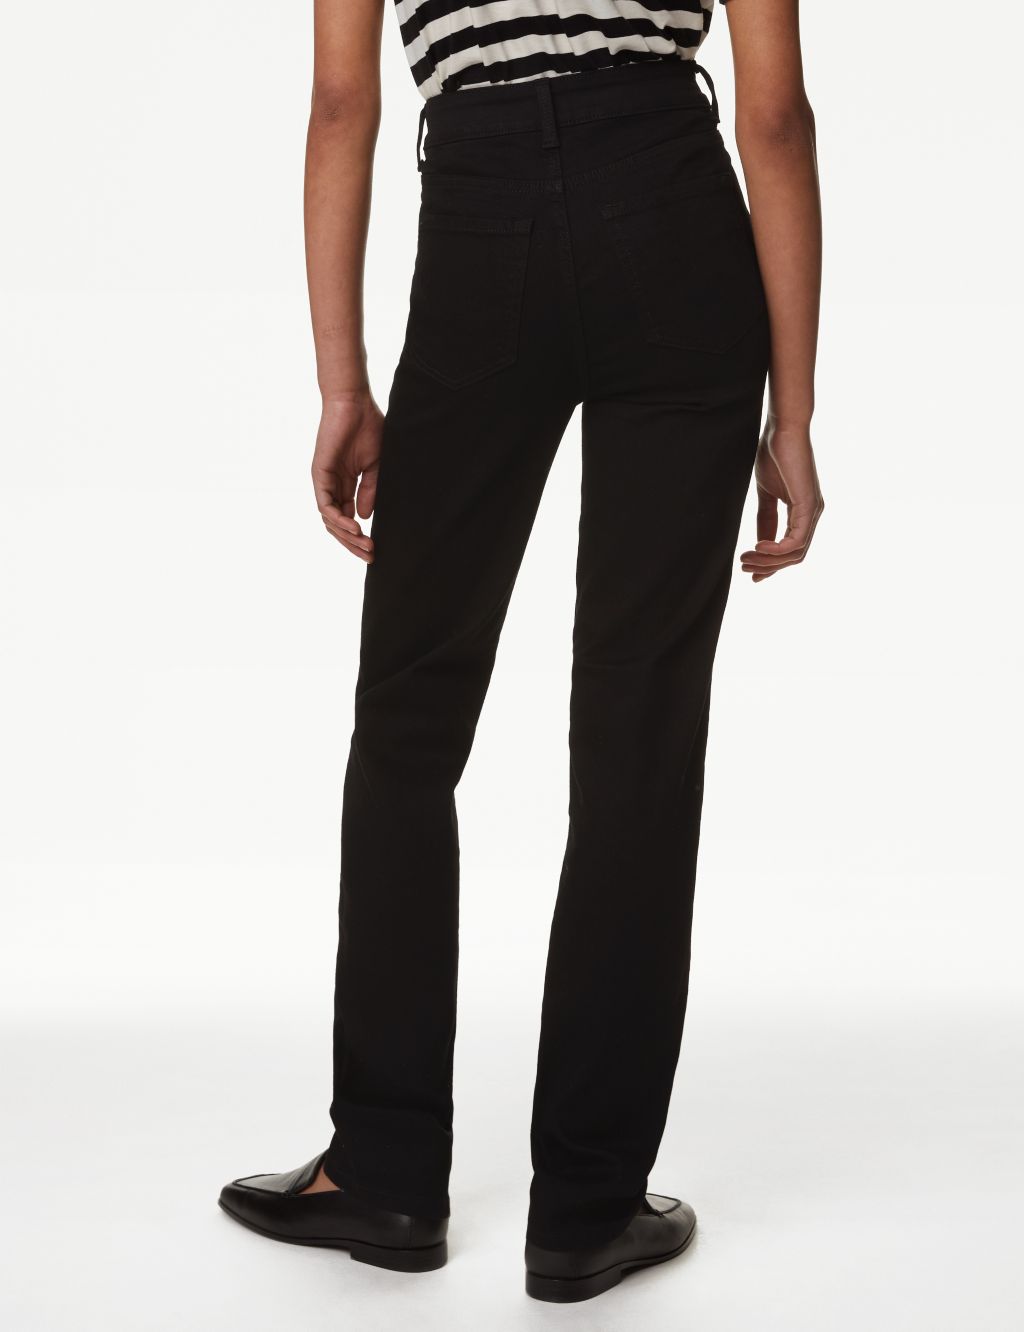 Sienna Straight Leg Jeans with Stretch image 5